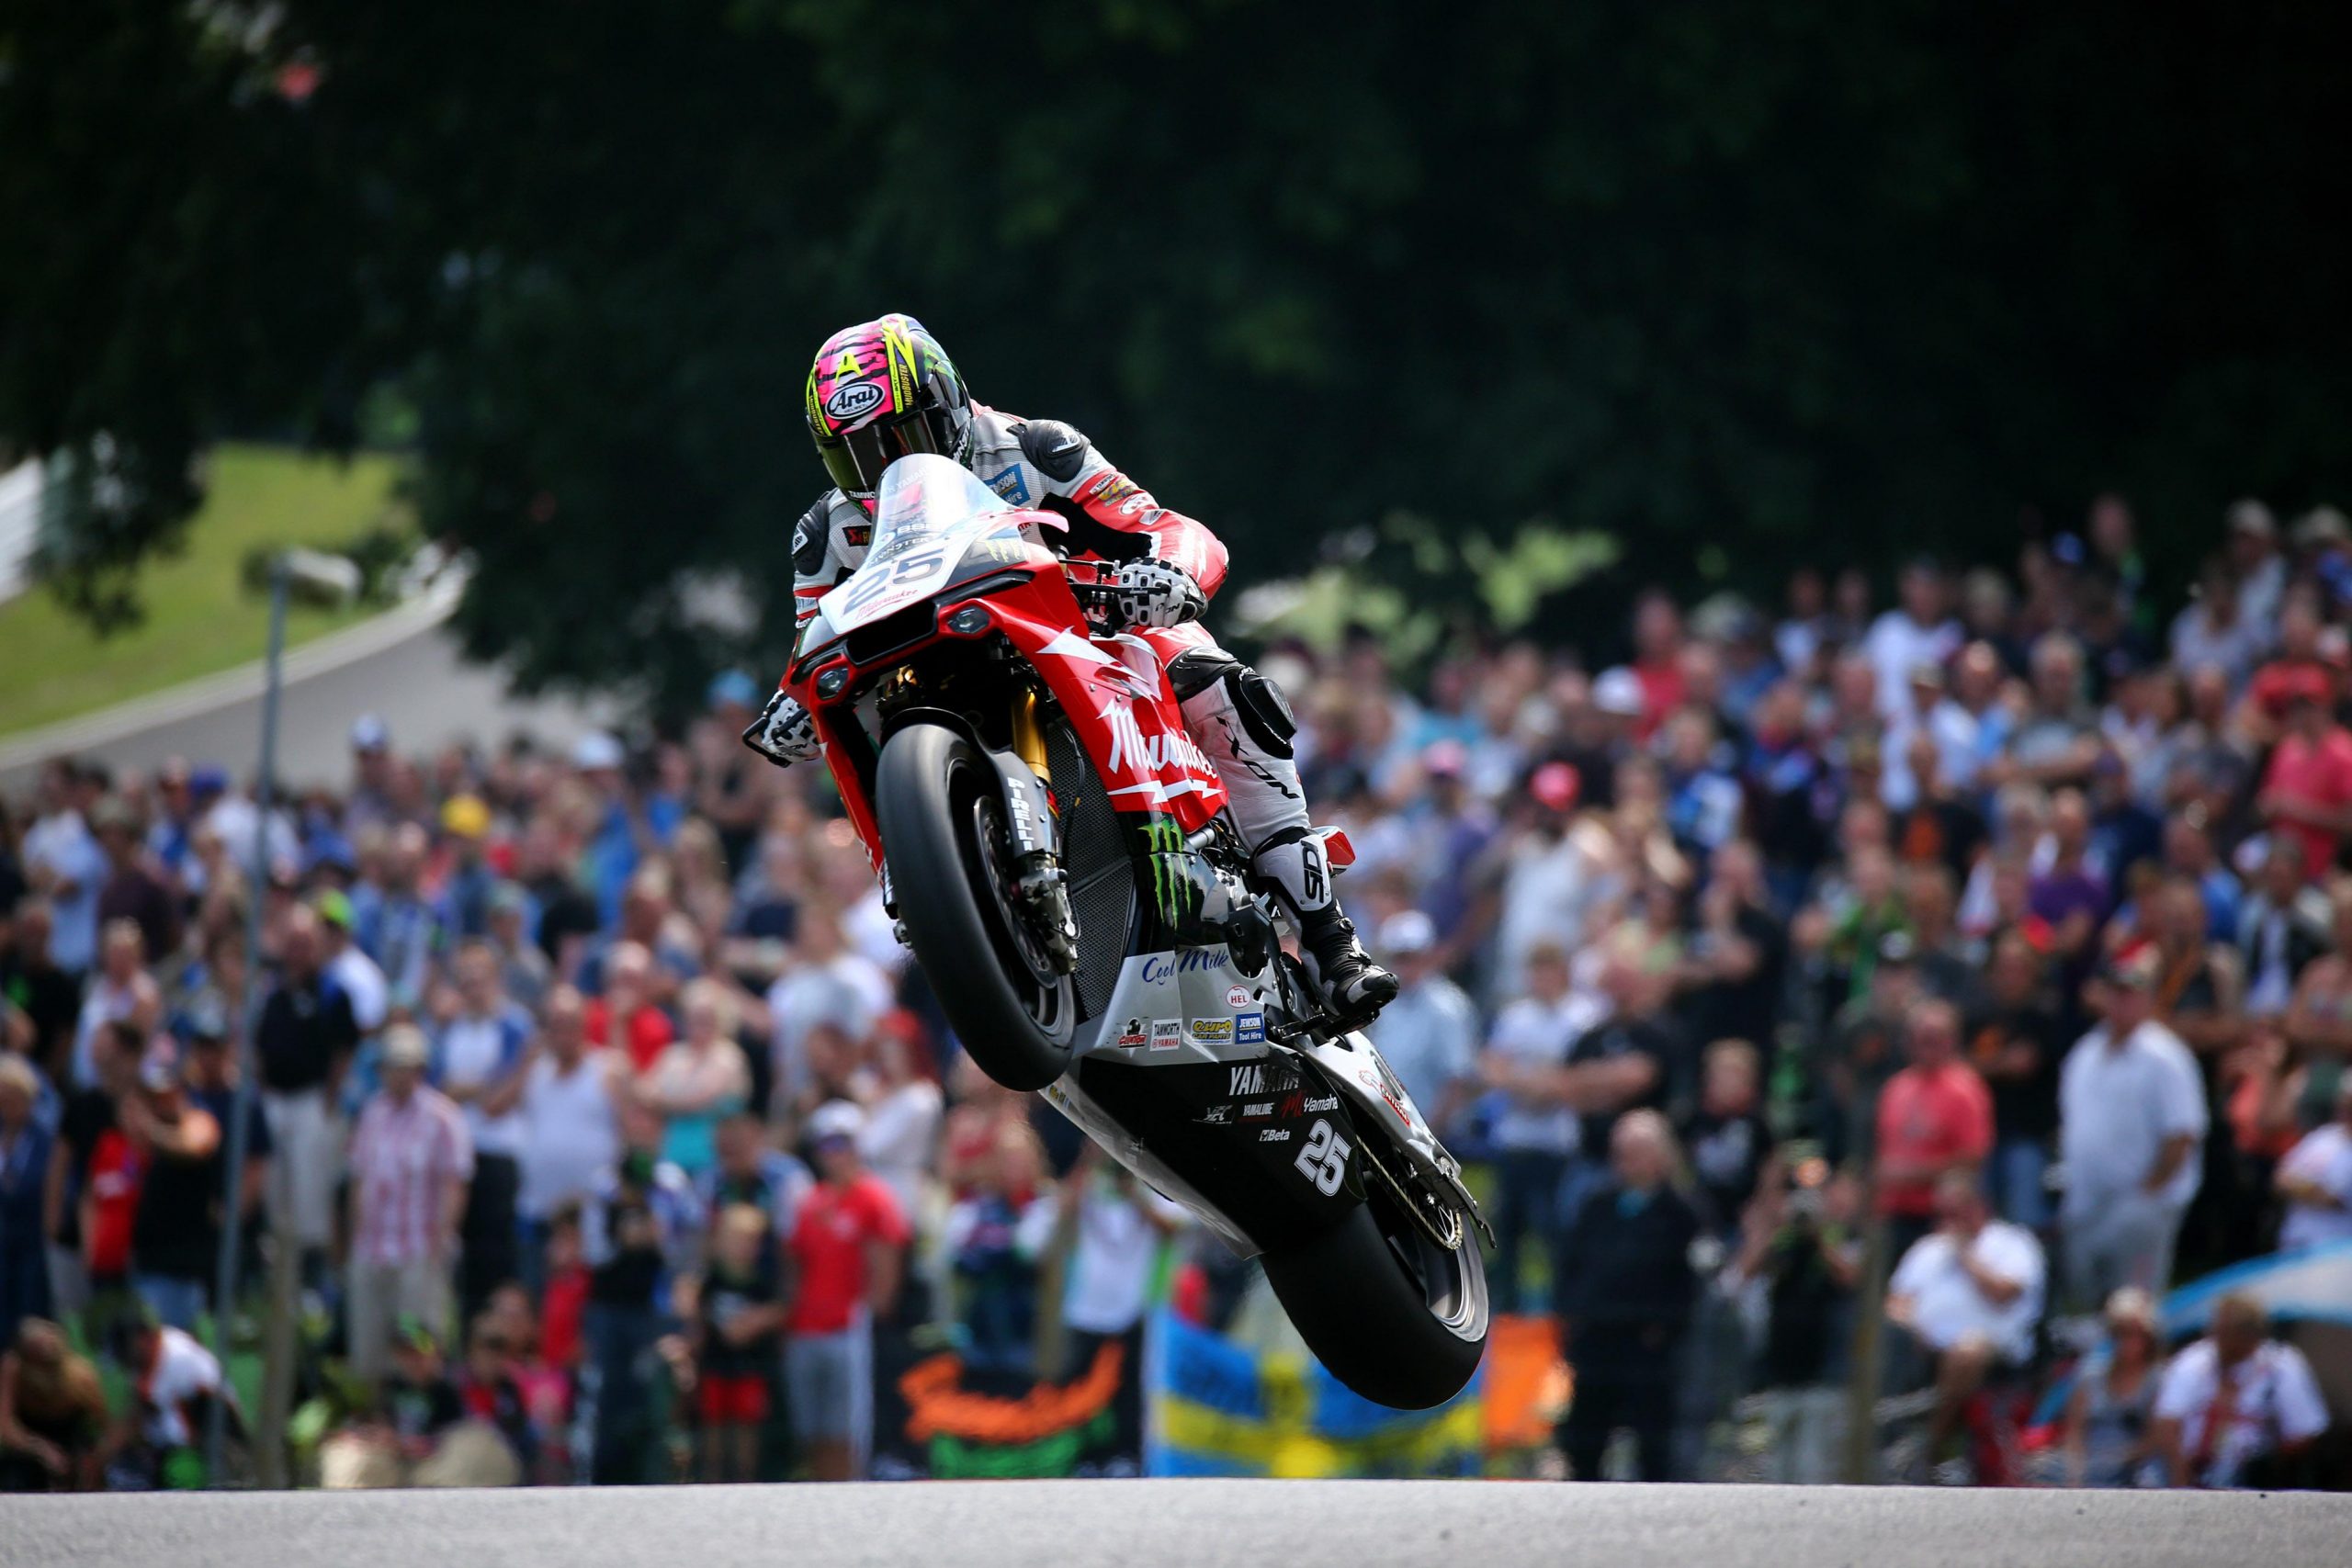 Josh Brookes in spectacular action over the Mountain at Cadwell park image by Impact Images